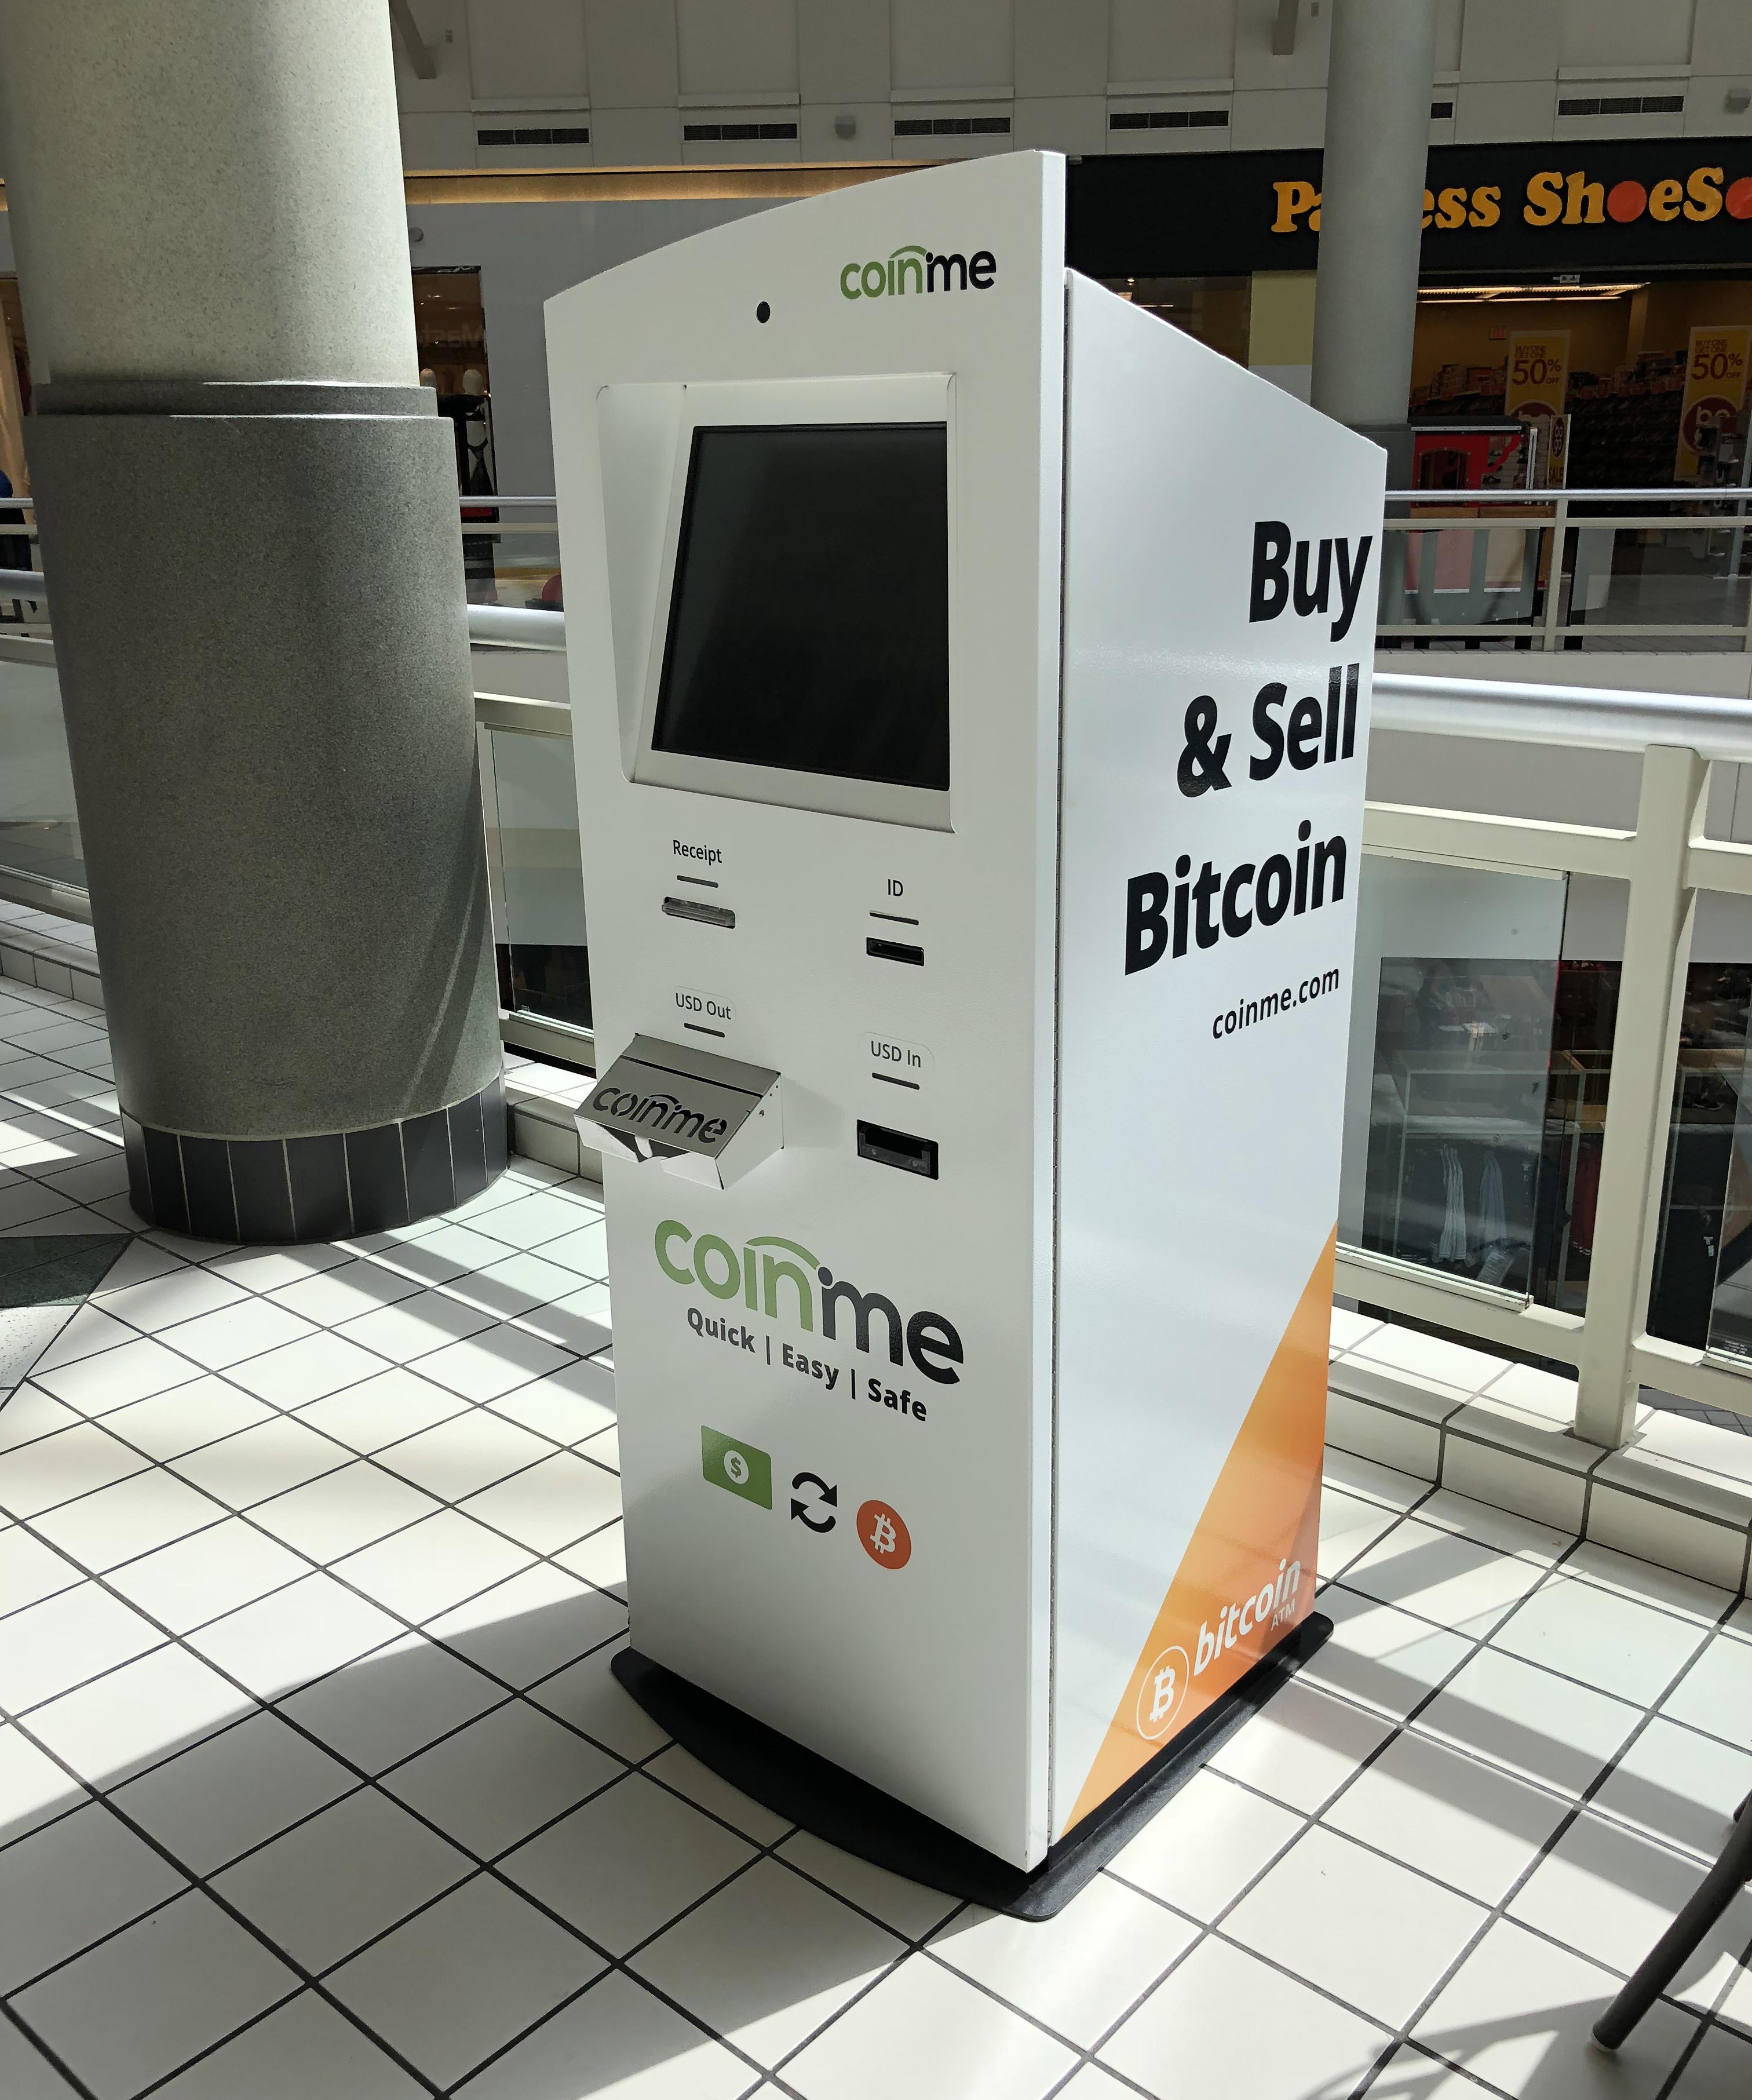 Bitcoin can be purchased with MoneyGram using Coinme ATM operators